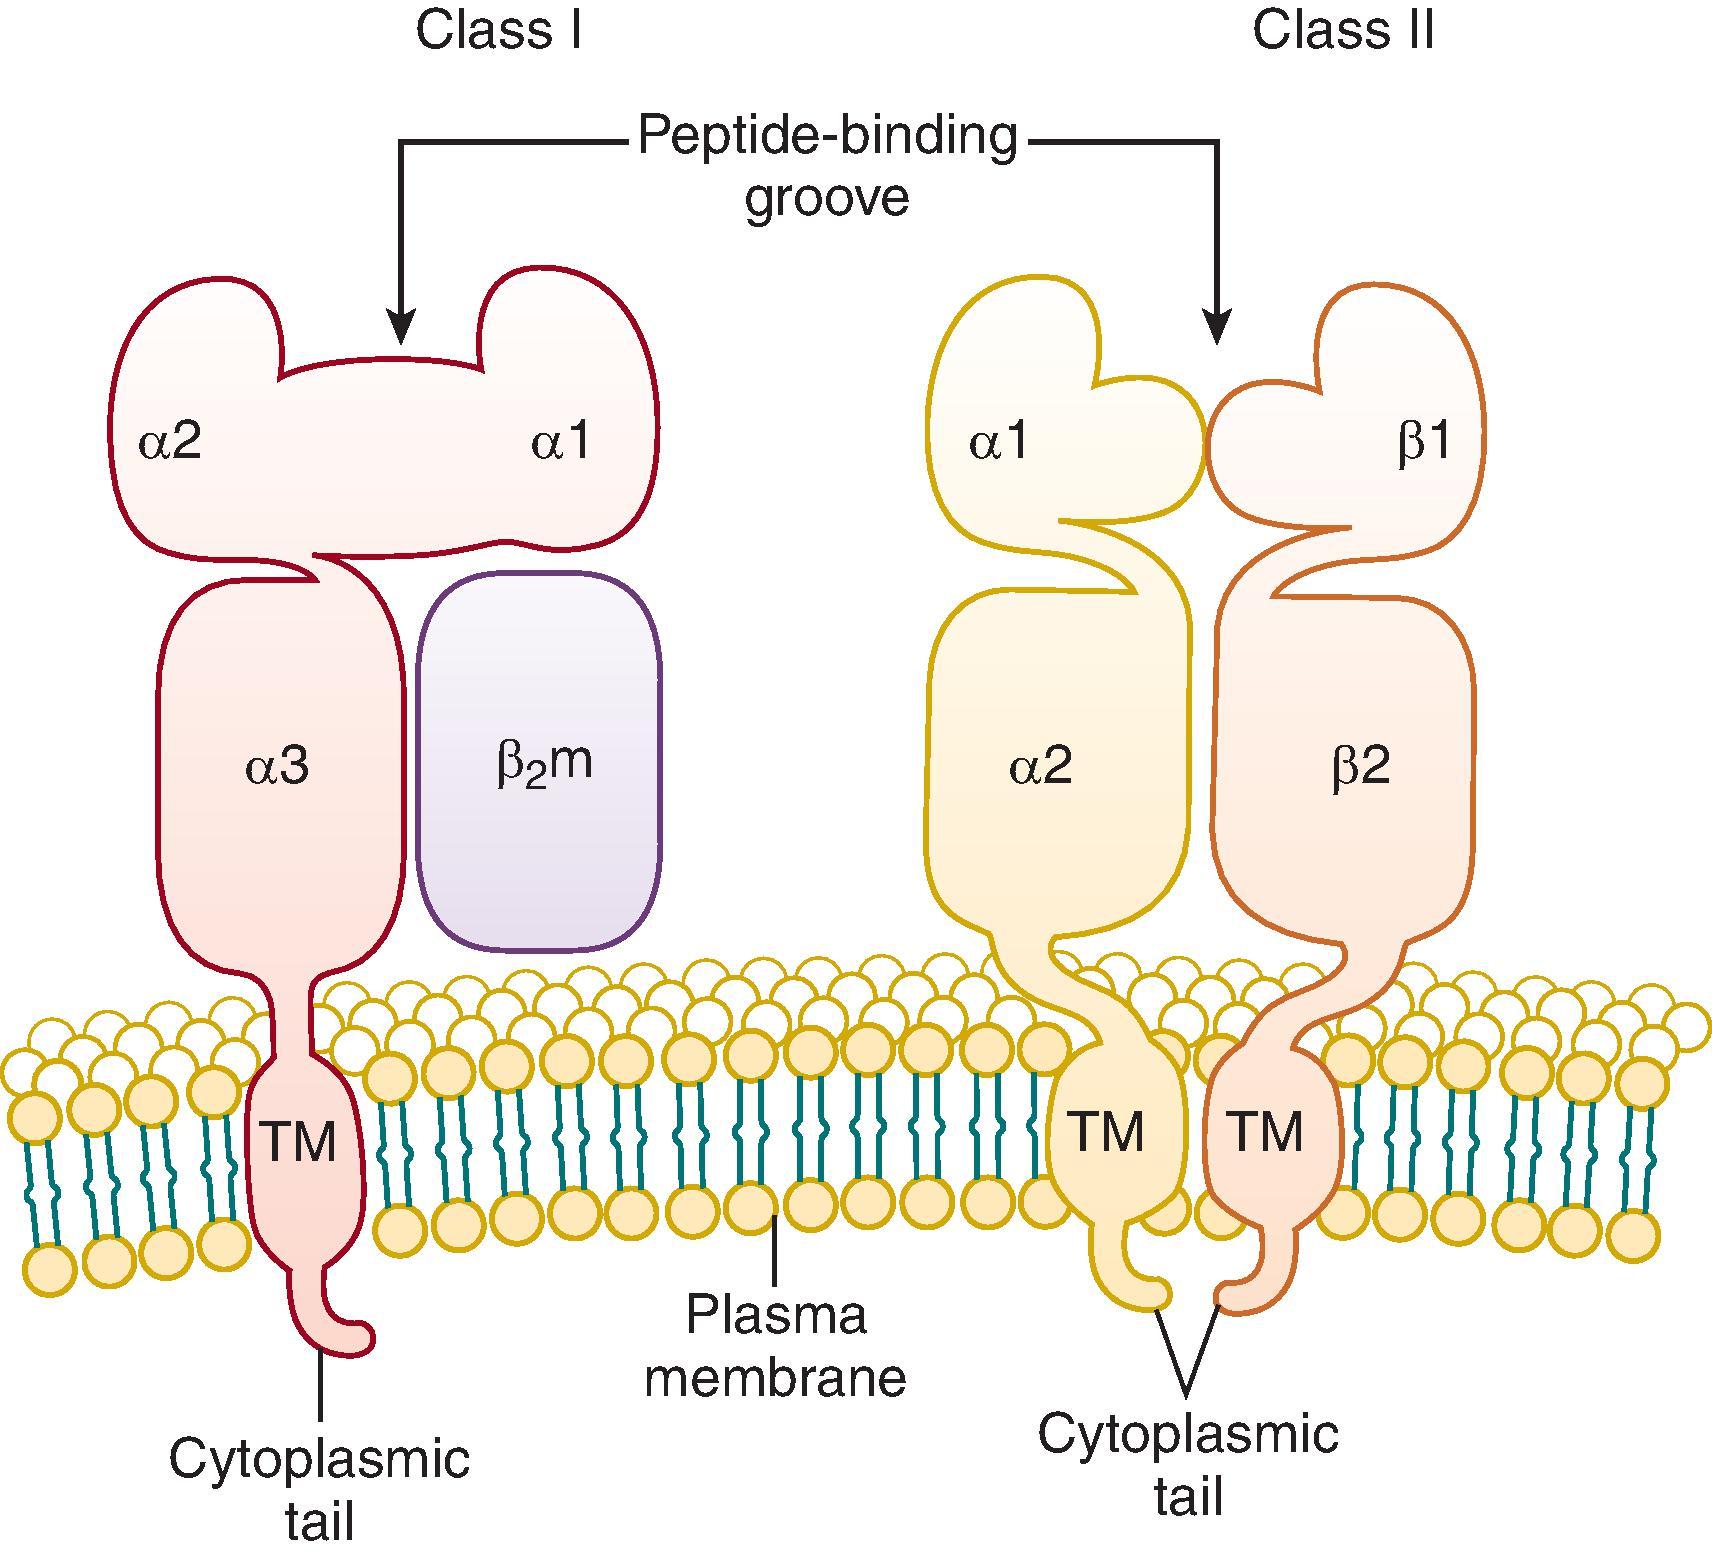 • Fig. 61.1, Structure of human leukocyte antigens class I and class II molecules. Beta 2 -microglobulin (β 2 m) is the light chain of the class I molecule. The α chain of the class I molecule has two peptide-binding domains (α1 and α2), an immunoglobulin-like domain (α3), the transmembrane (TM) region, and the cytoplasmic tail. Each of the class II α and β chains has four domains: the peptide-binding domain (α1 or β1), the immunoglobulin-like domain (α2 or β2), the transmembrane region, and the cytoplasmic tail. (From Klein J, Sato A. The HLA system. N Engl J Med . 2000;343:702–709.)